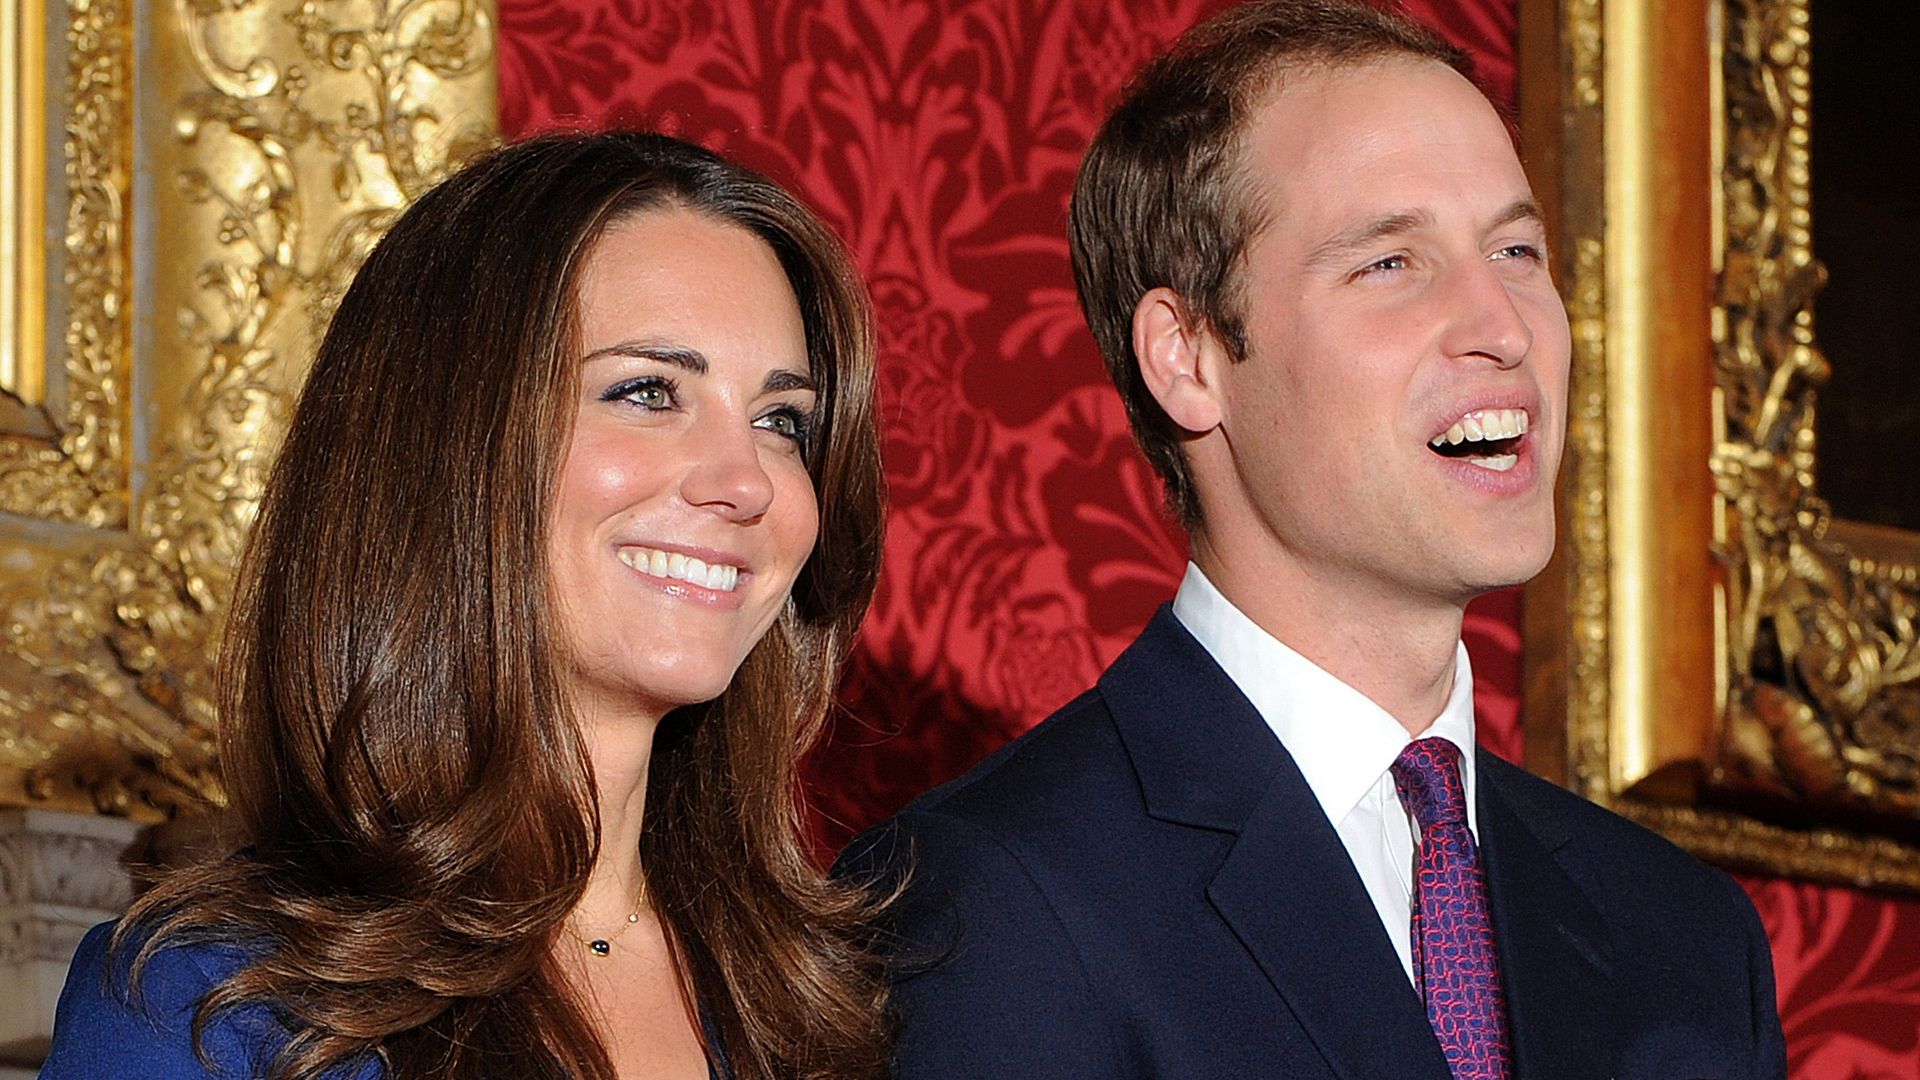 Prince William and Kate Middleton pose for photographers during a photocall to mark their engagement